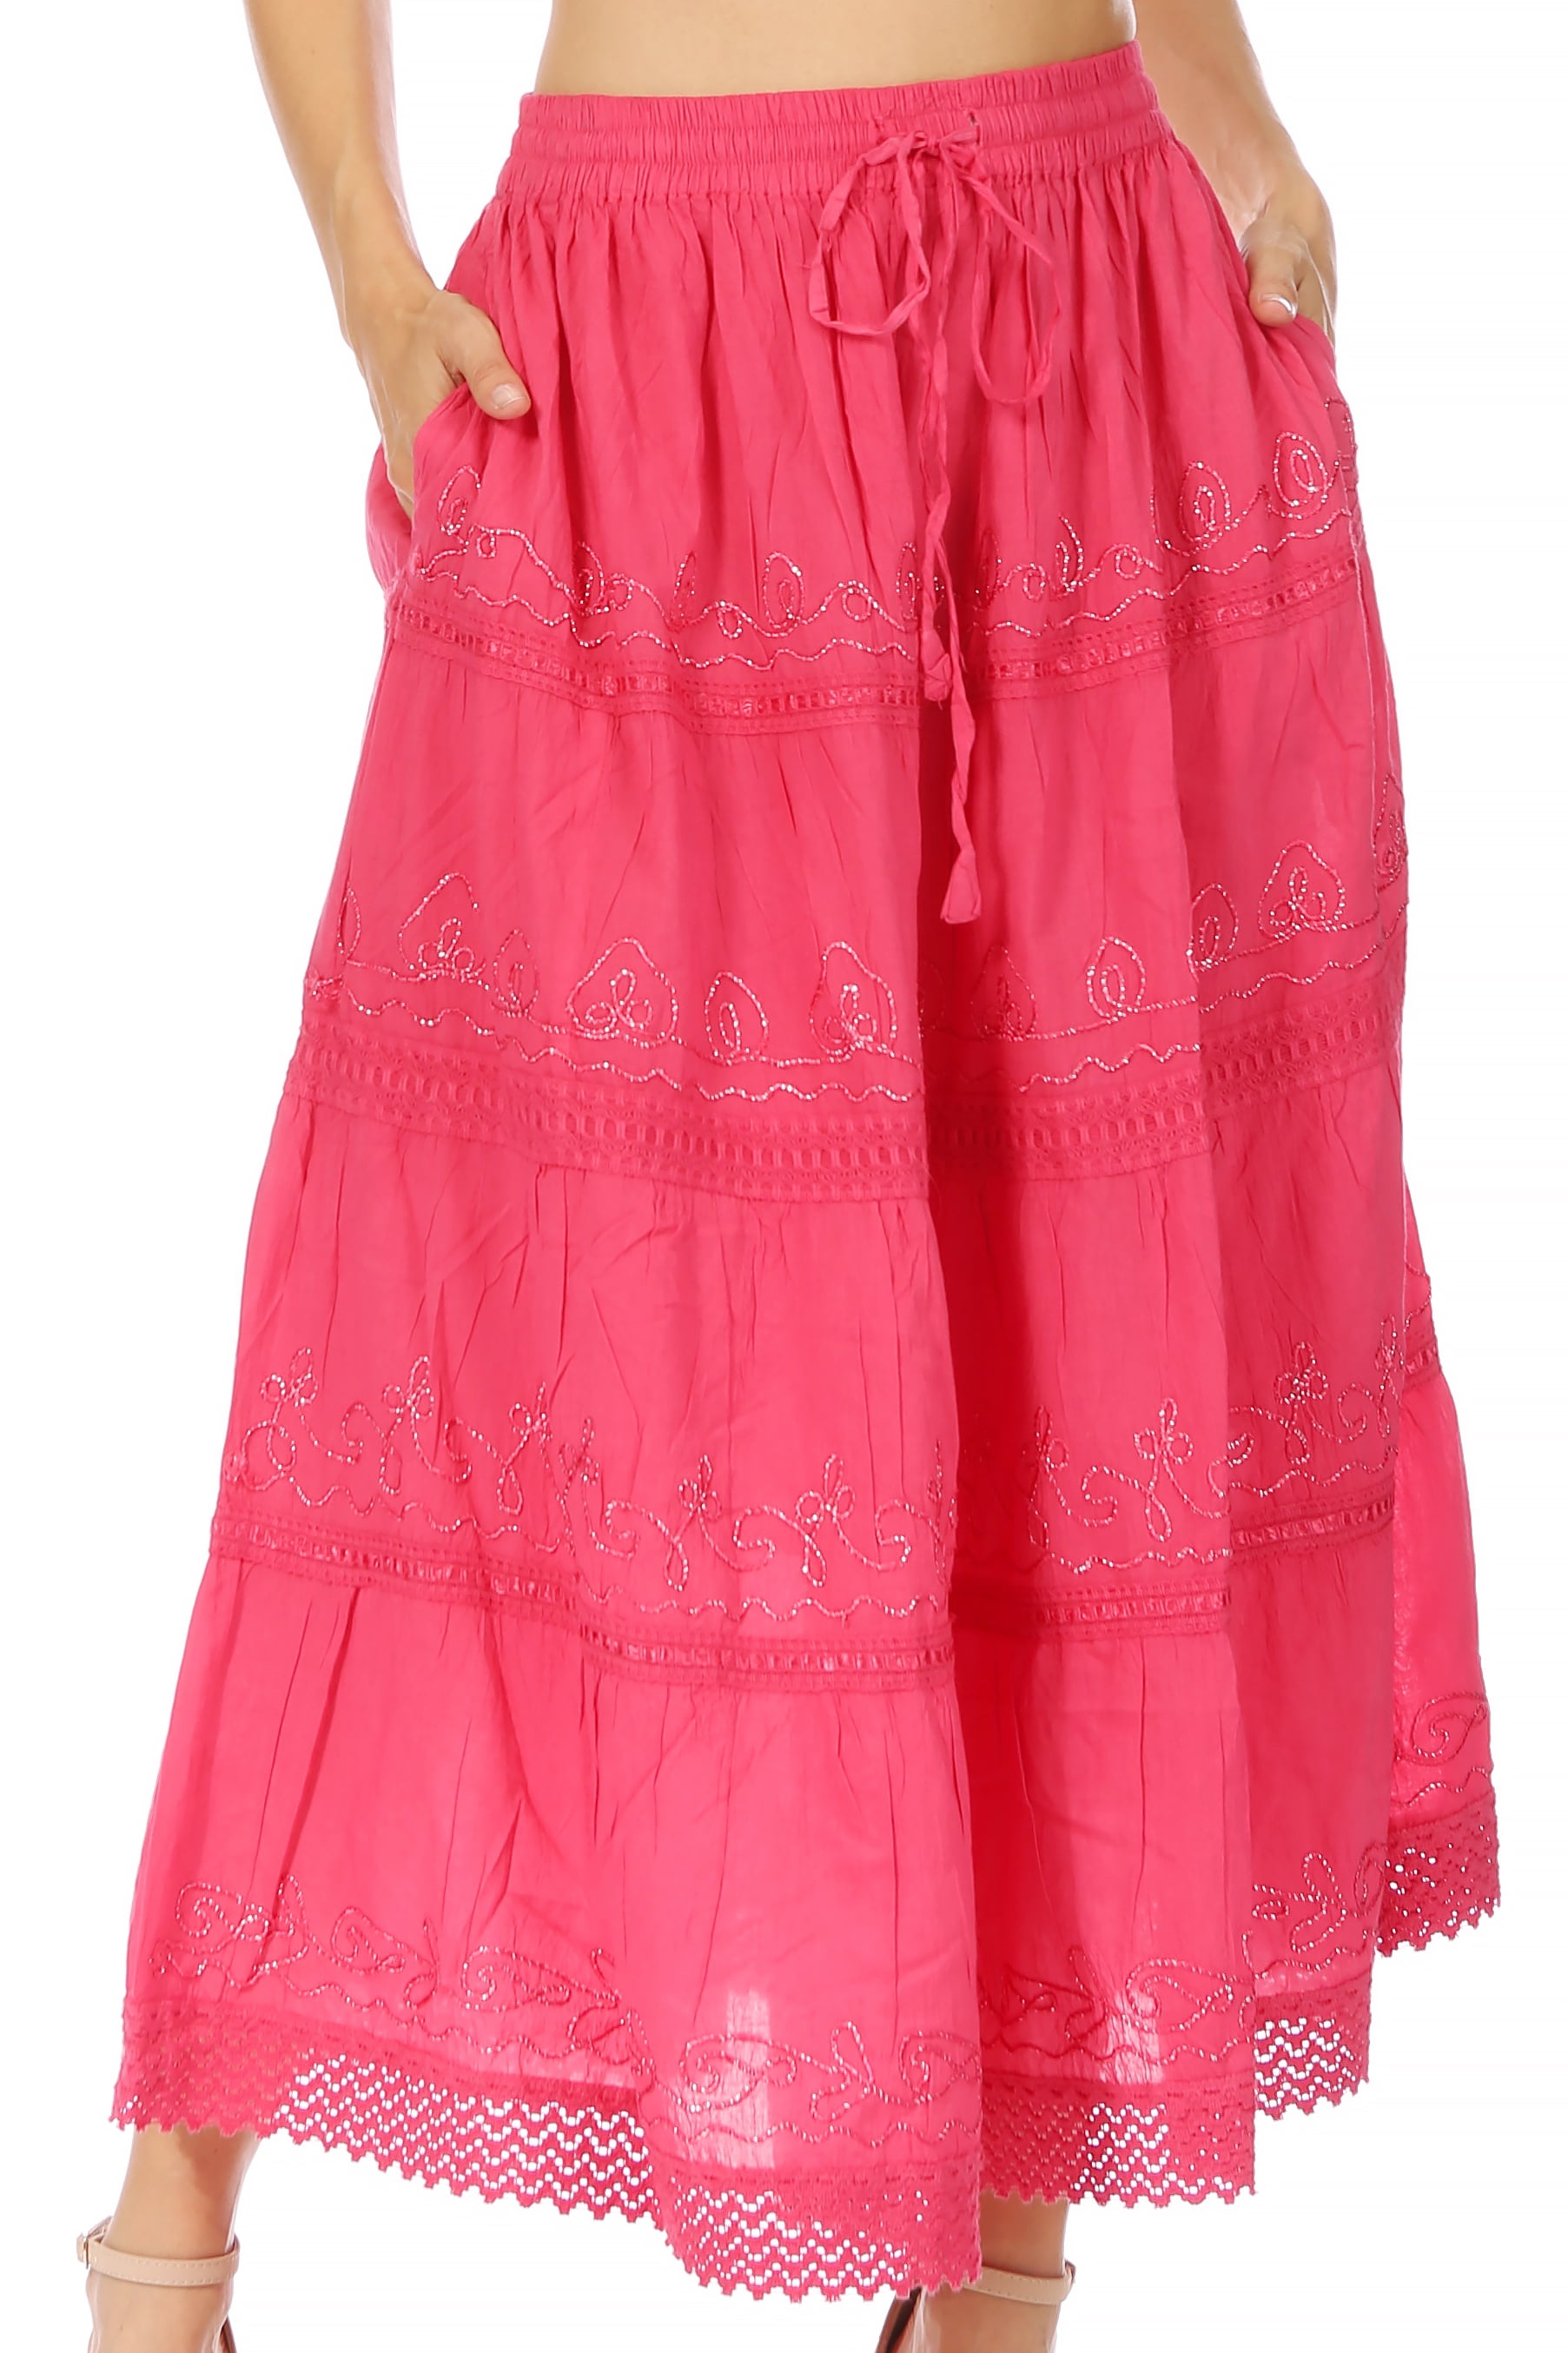 Sakkas Solid Embroidered Crochet Lace Trim Gypsy Bohemian Mid Length Cotton  Skirt - Pink - One Size - Walmart.com